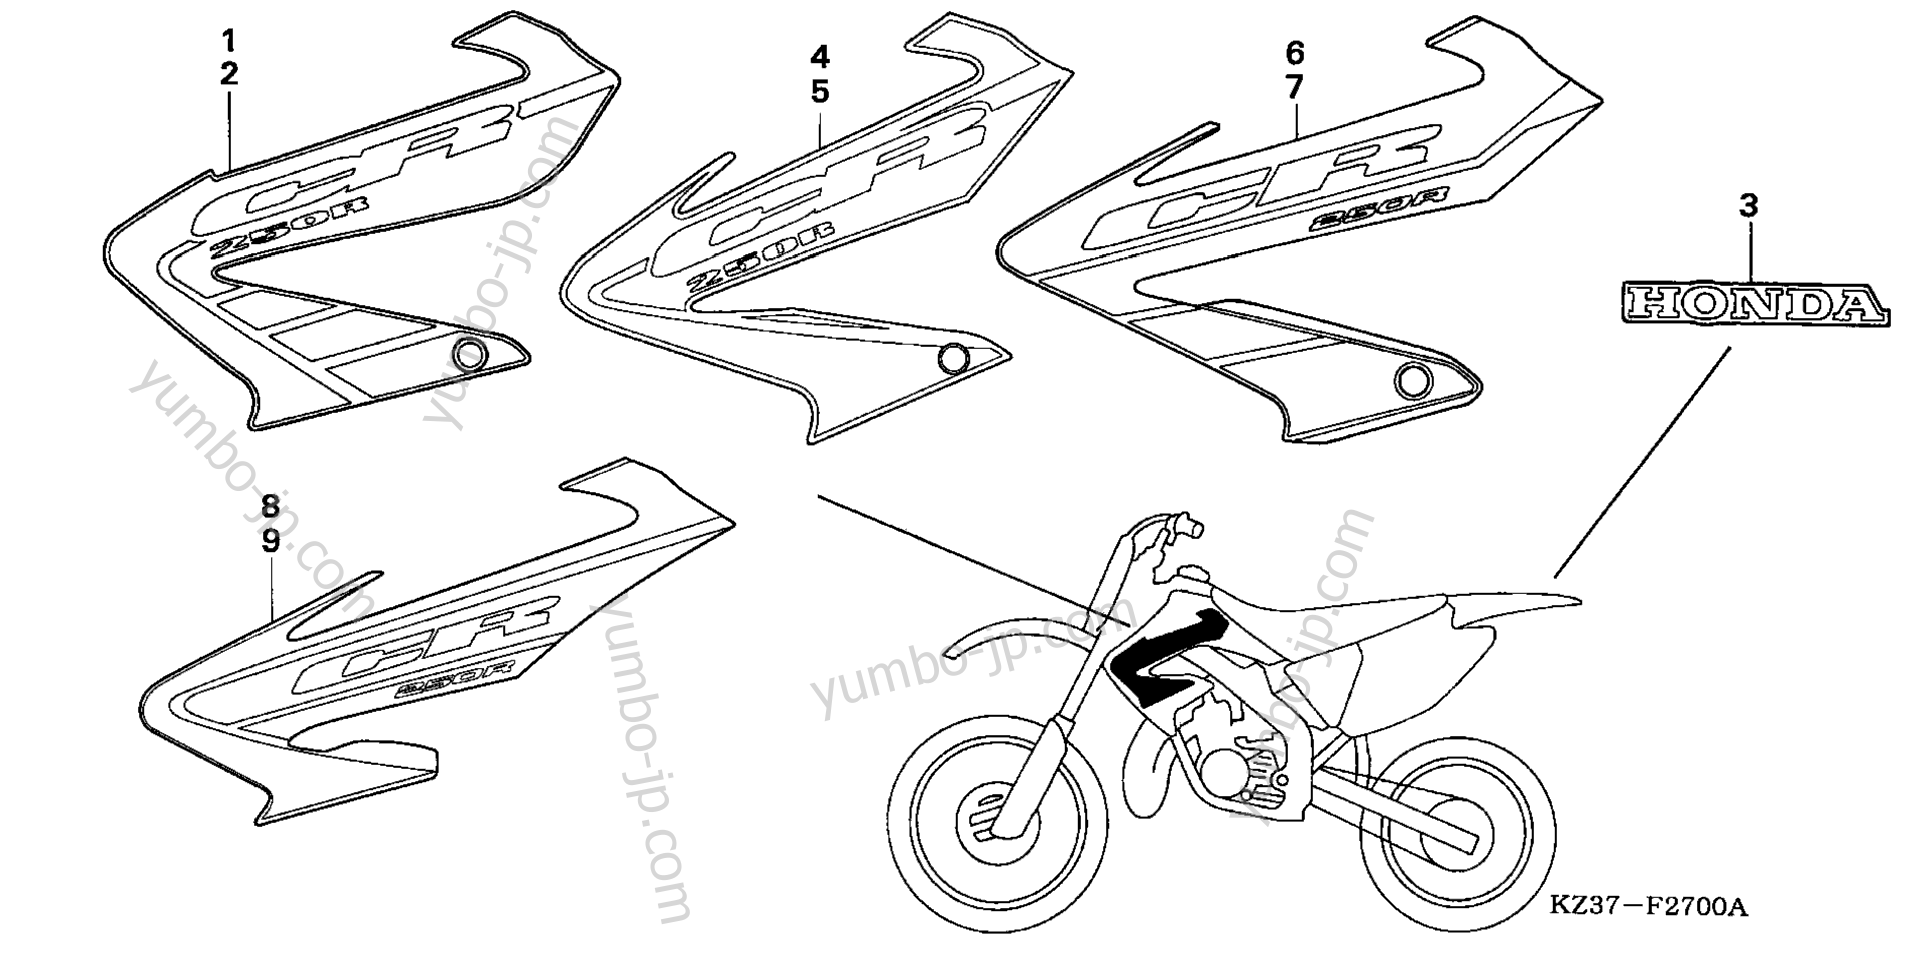 MARKS ('02-'05) for motorcycles HONDA CR250R A 2003 year